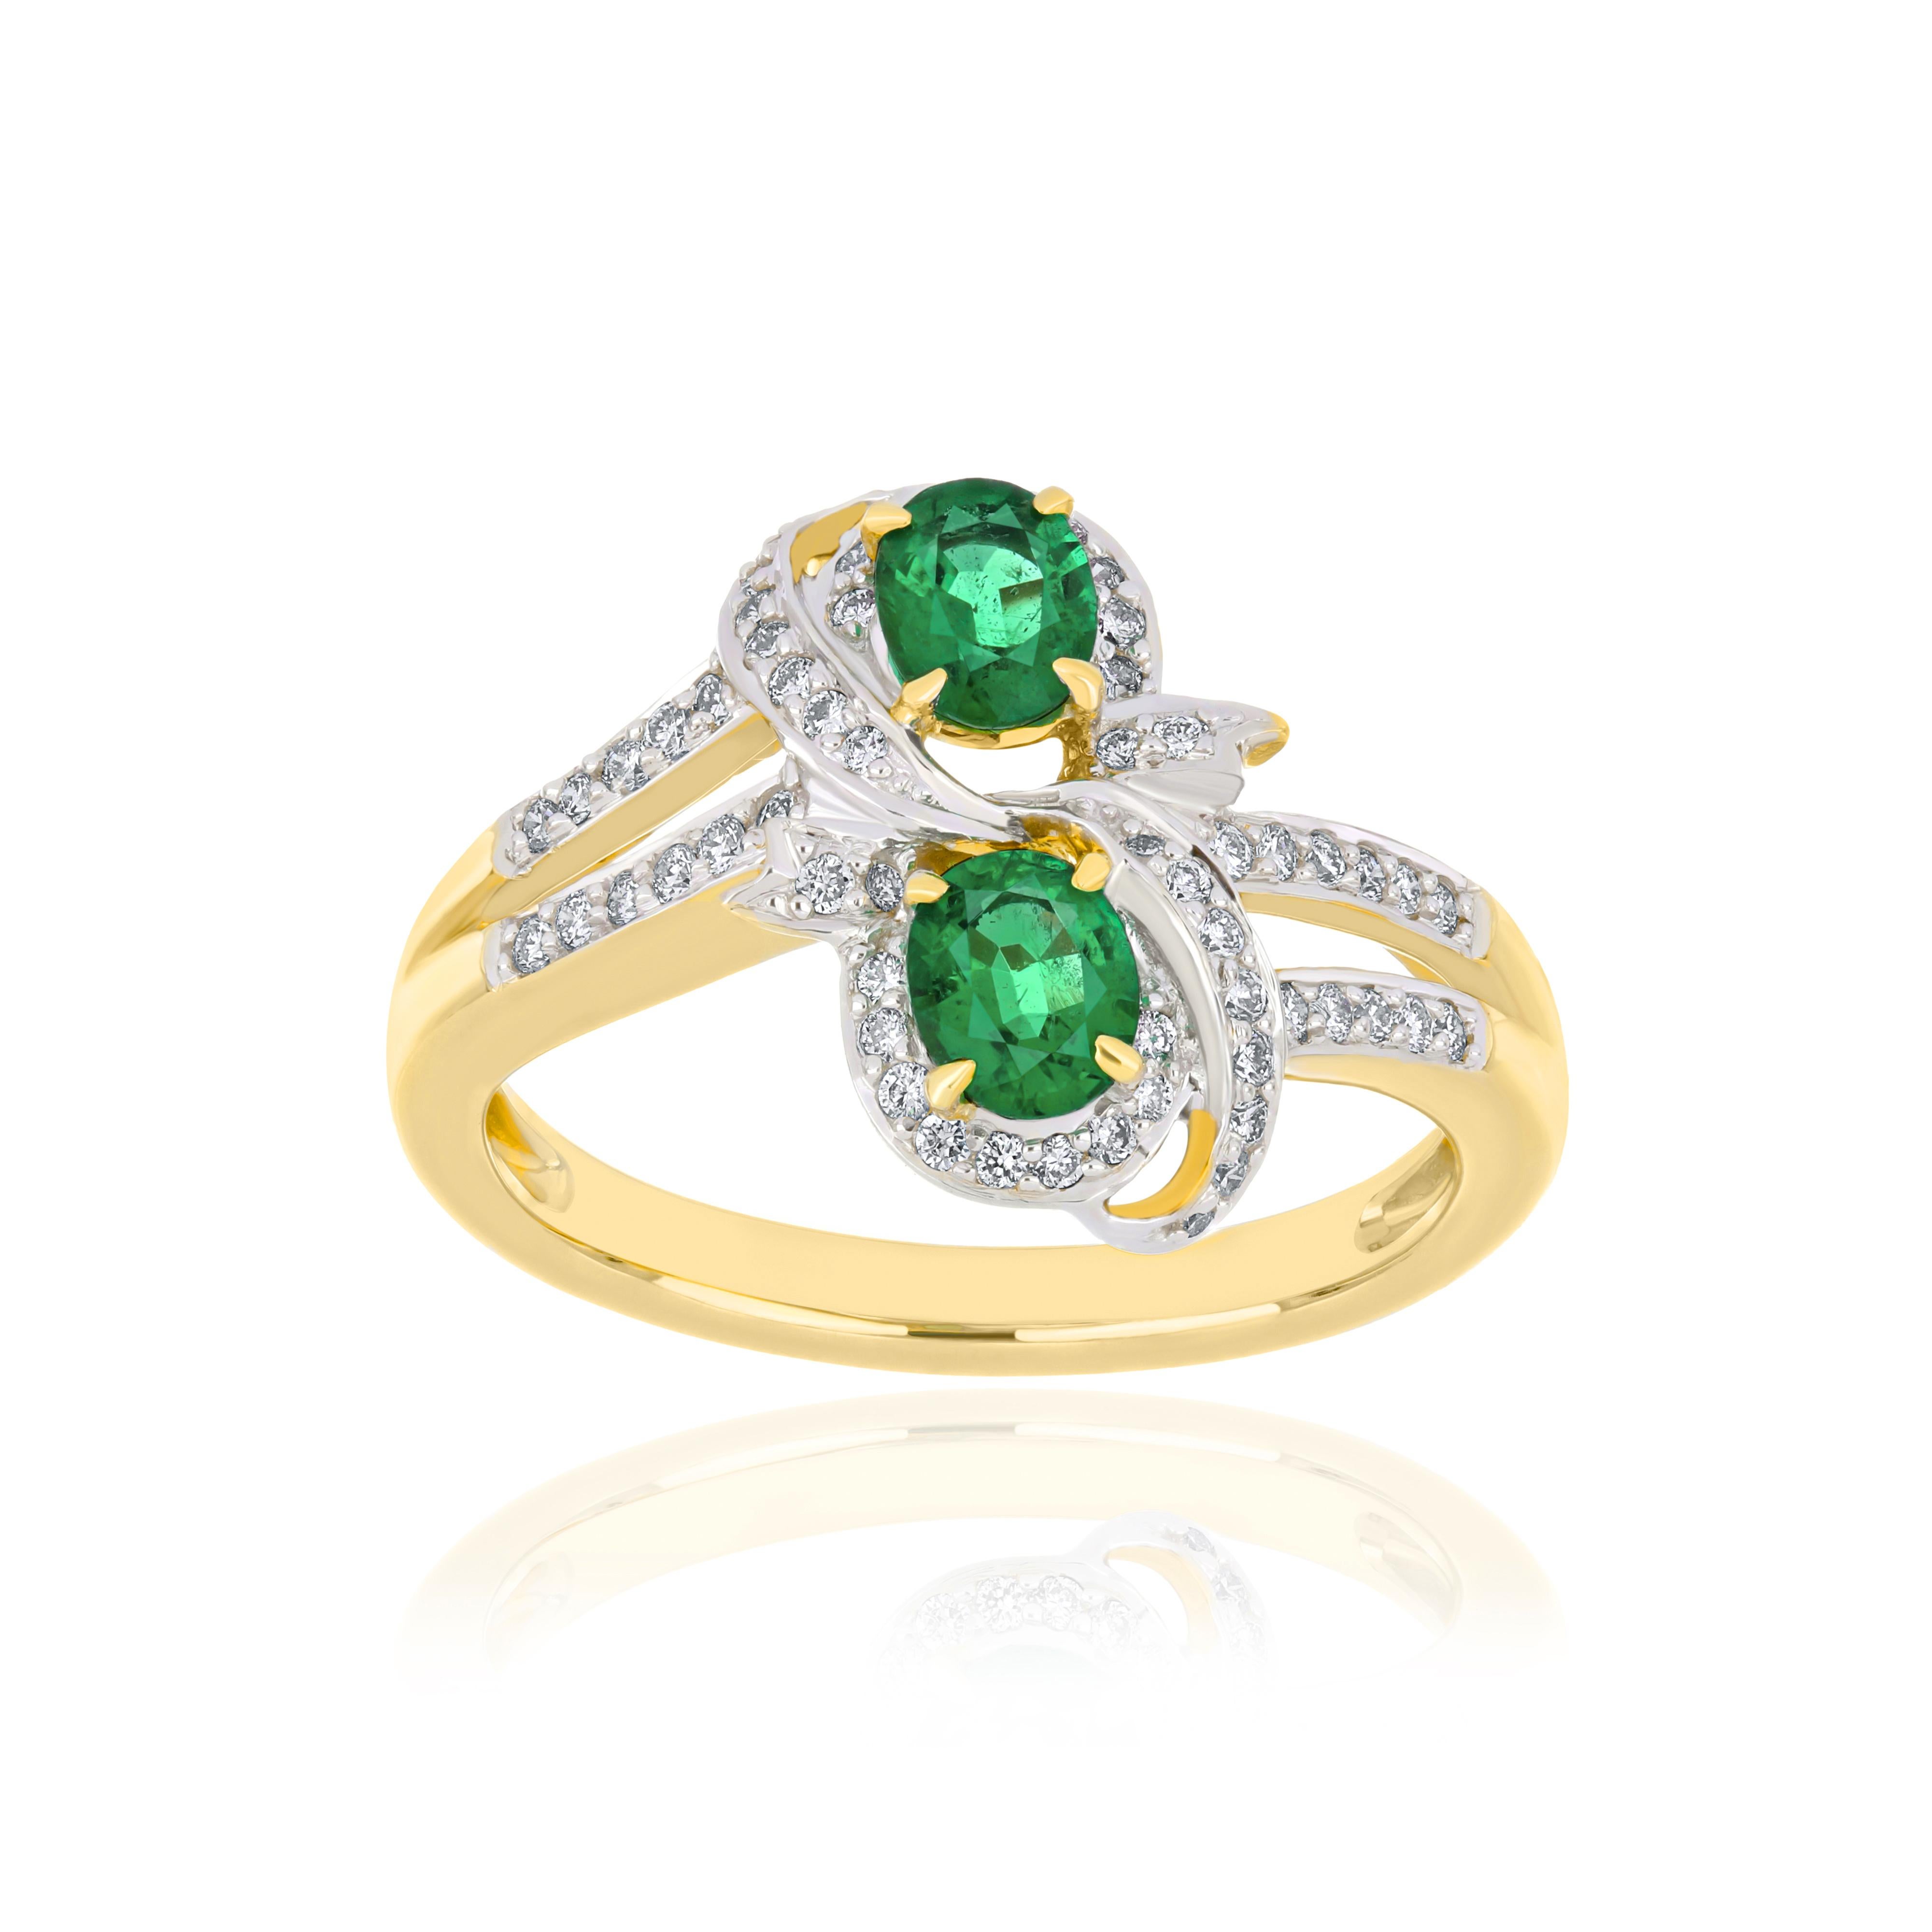 Oval Cut Emerald and Diamond Ring 18 Karat Yellow Gold Weddings & Party Wear Jewelry For Sale